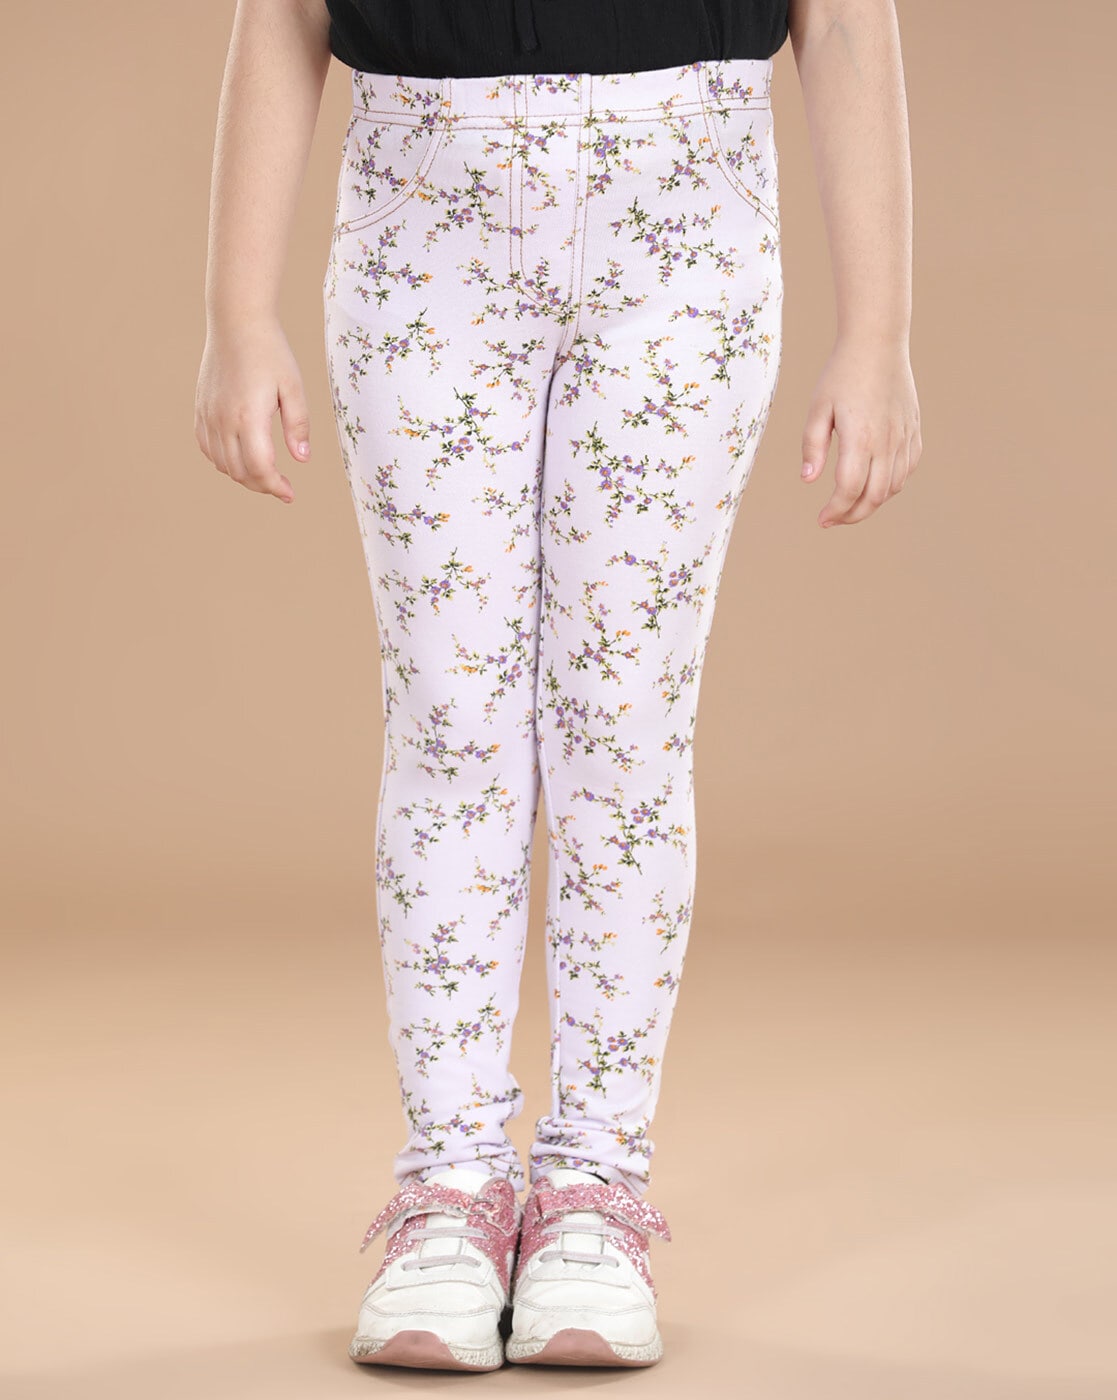 Girls Mix And Match Floral Print Knit Leggings | The Children's Place -  ROSE PETAL